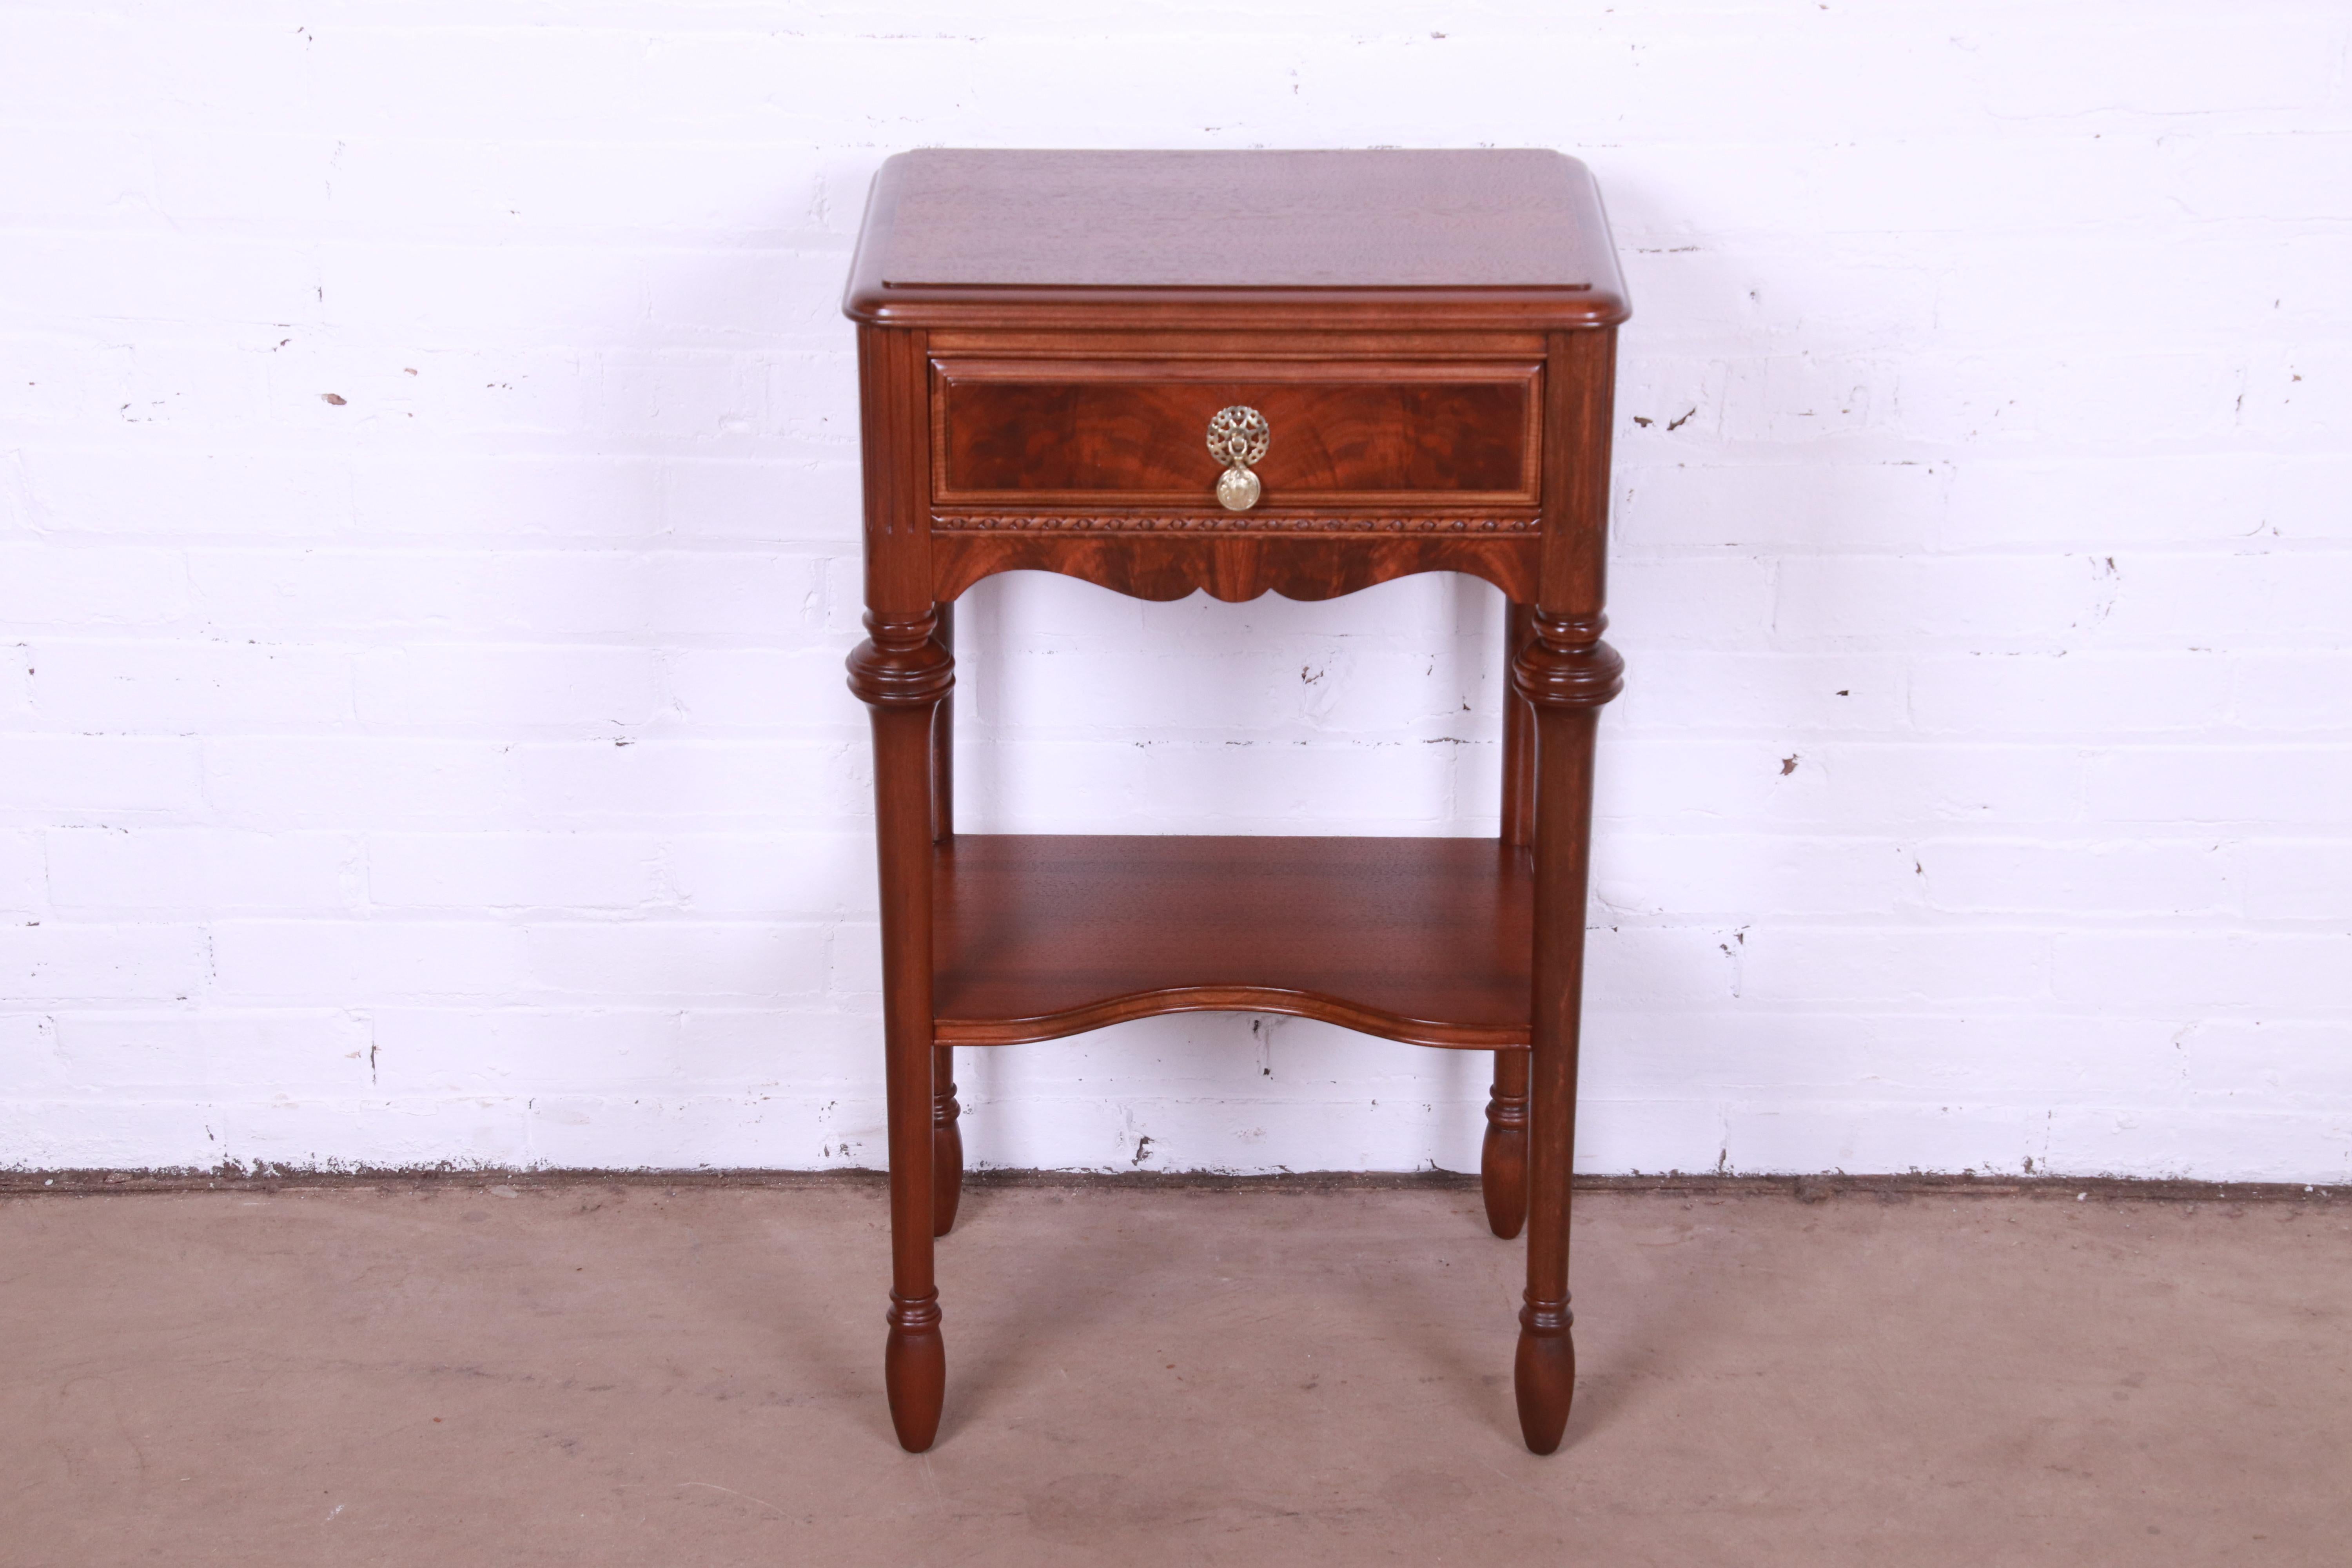 American Landstrom Furniture French Regency Louis XVI Mahogany Nightstand, Refinished